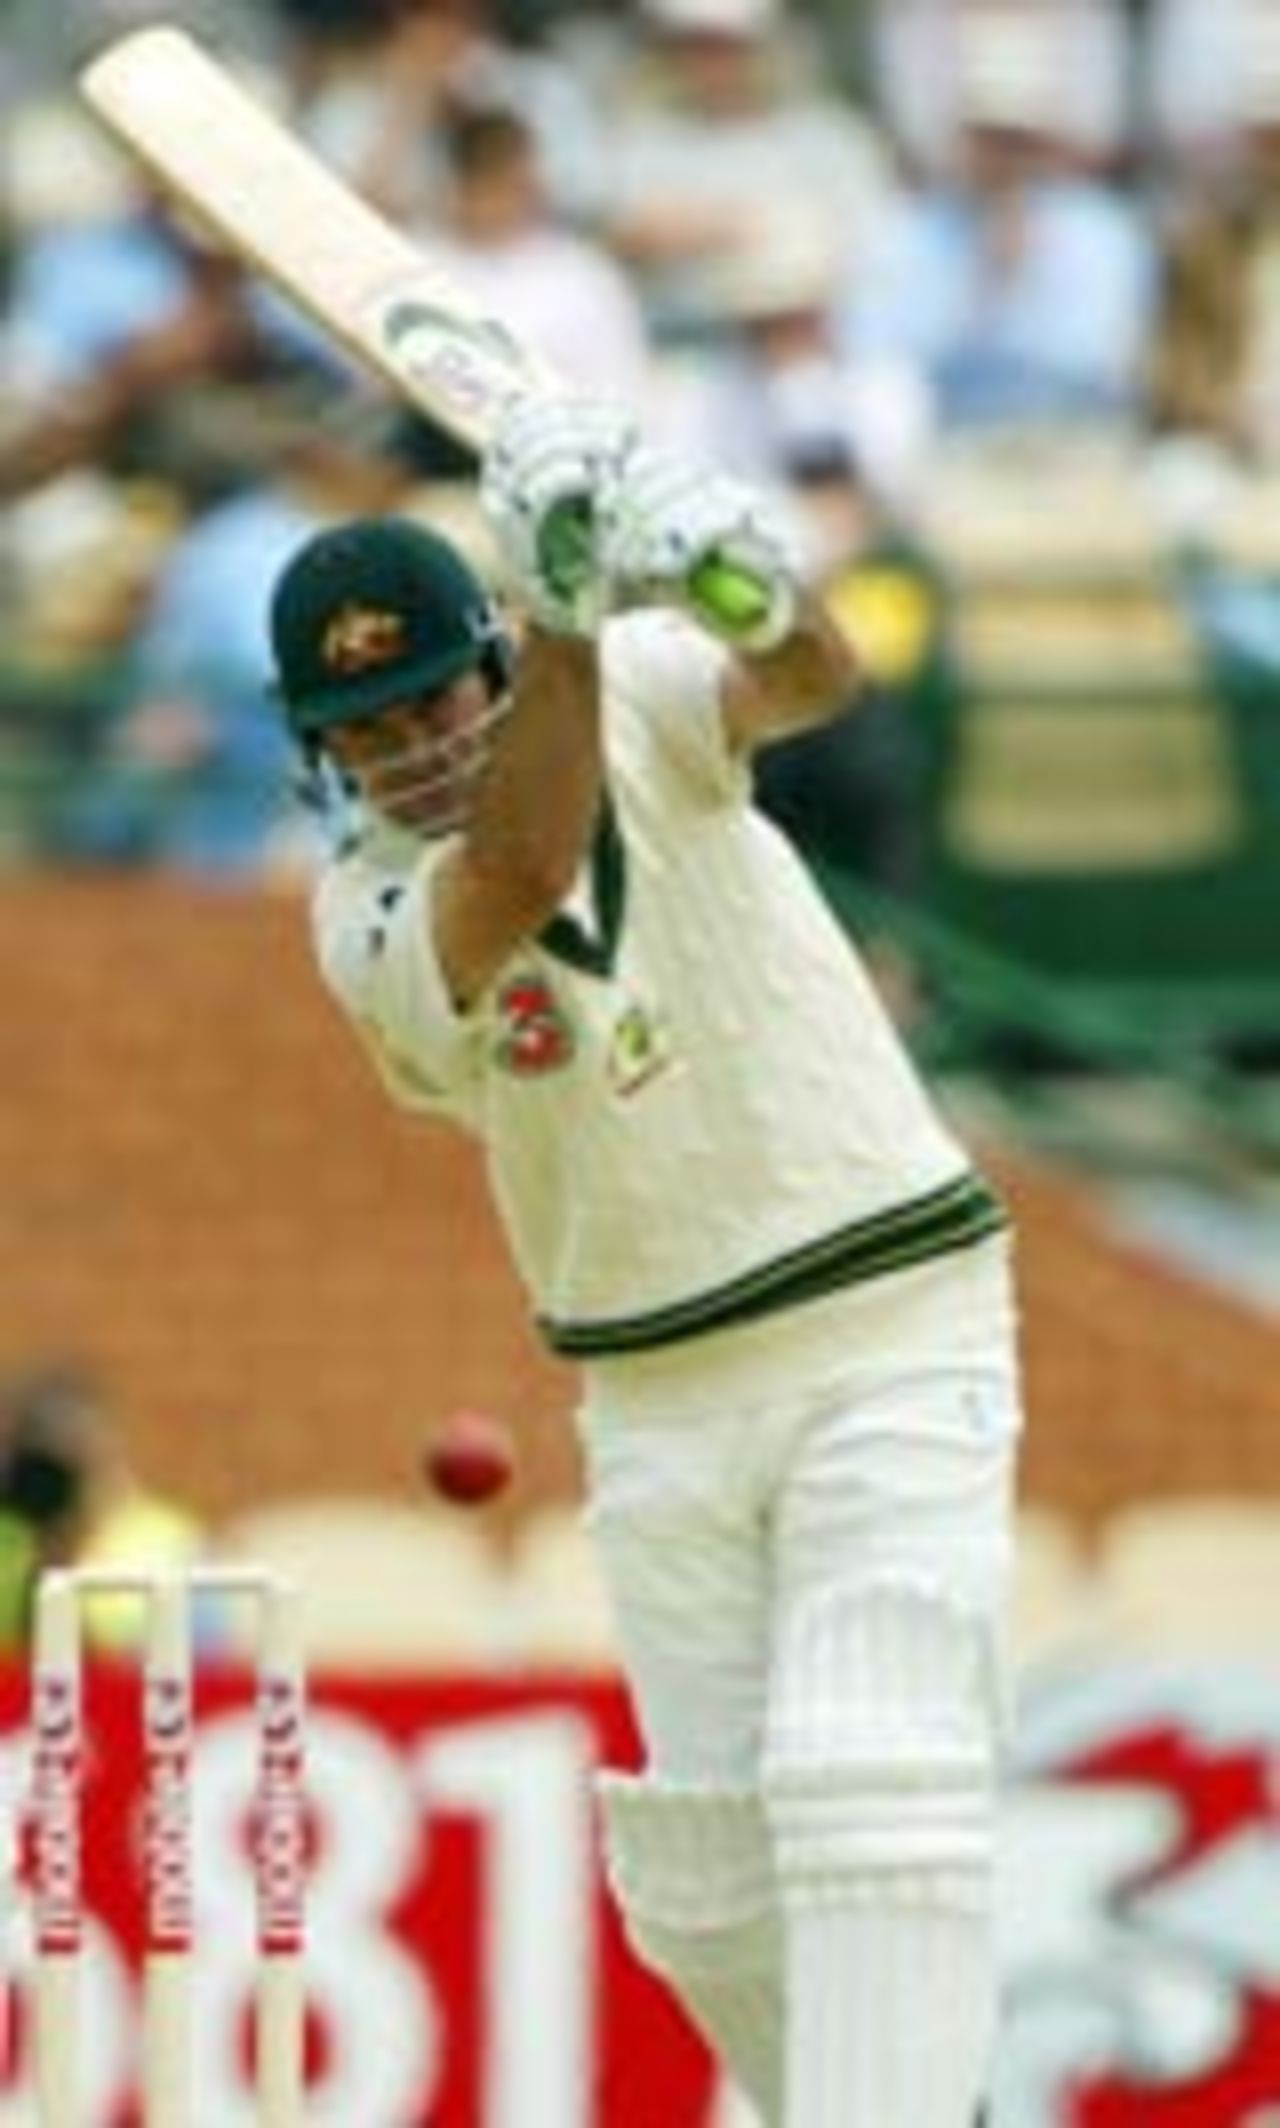 Ponting drives on the way to his double-century, Australia v India, 2nd Test, Adelaide, 2nd day, December 12, 2003